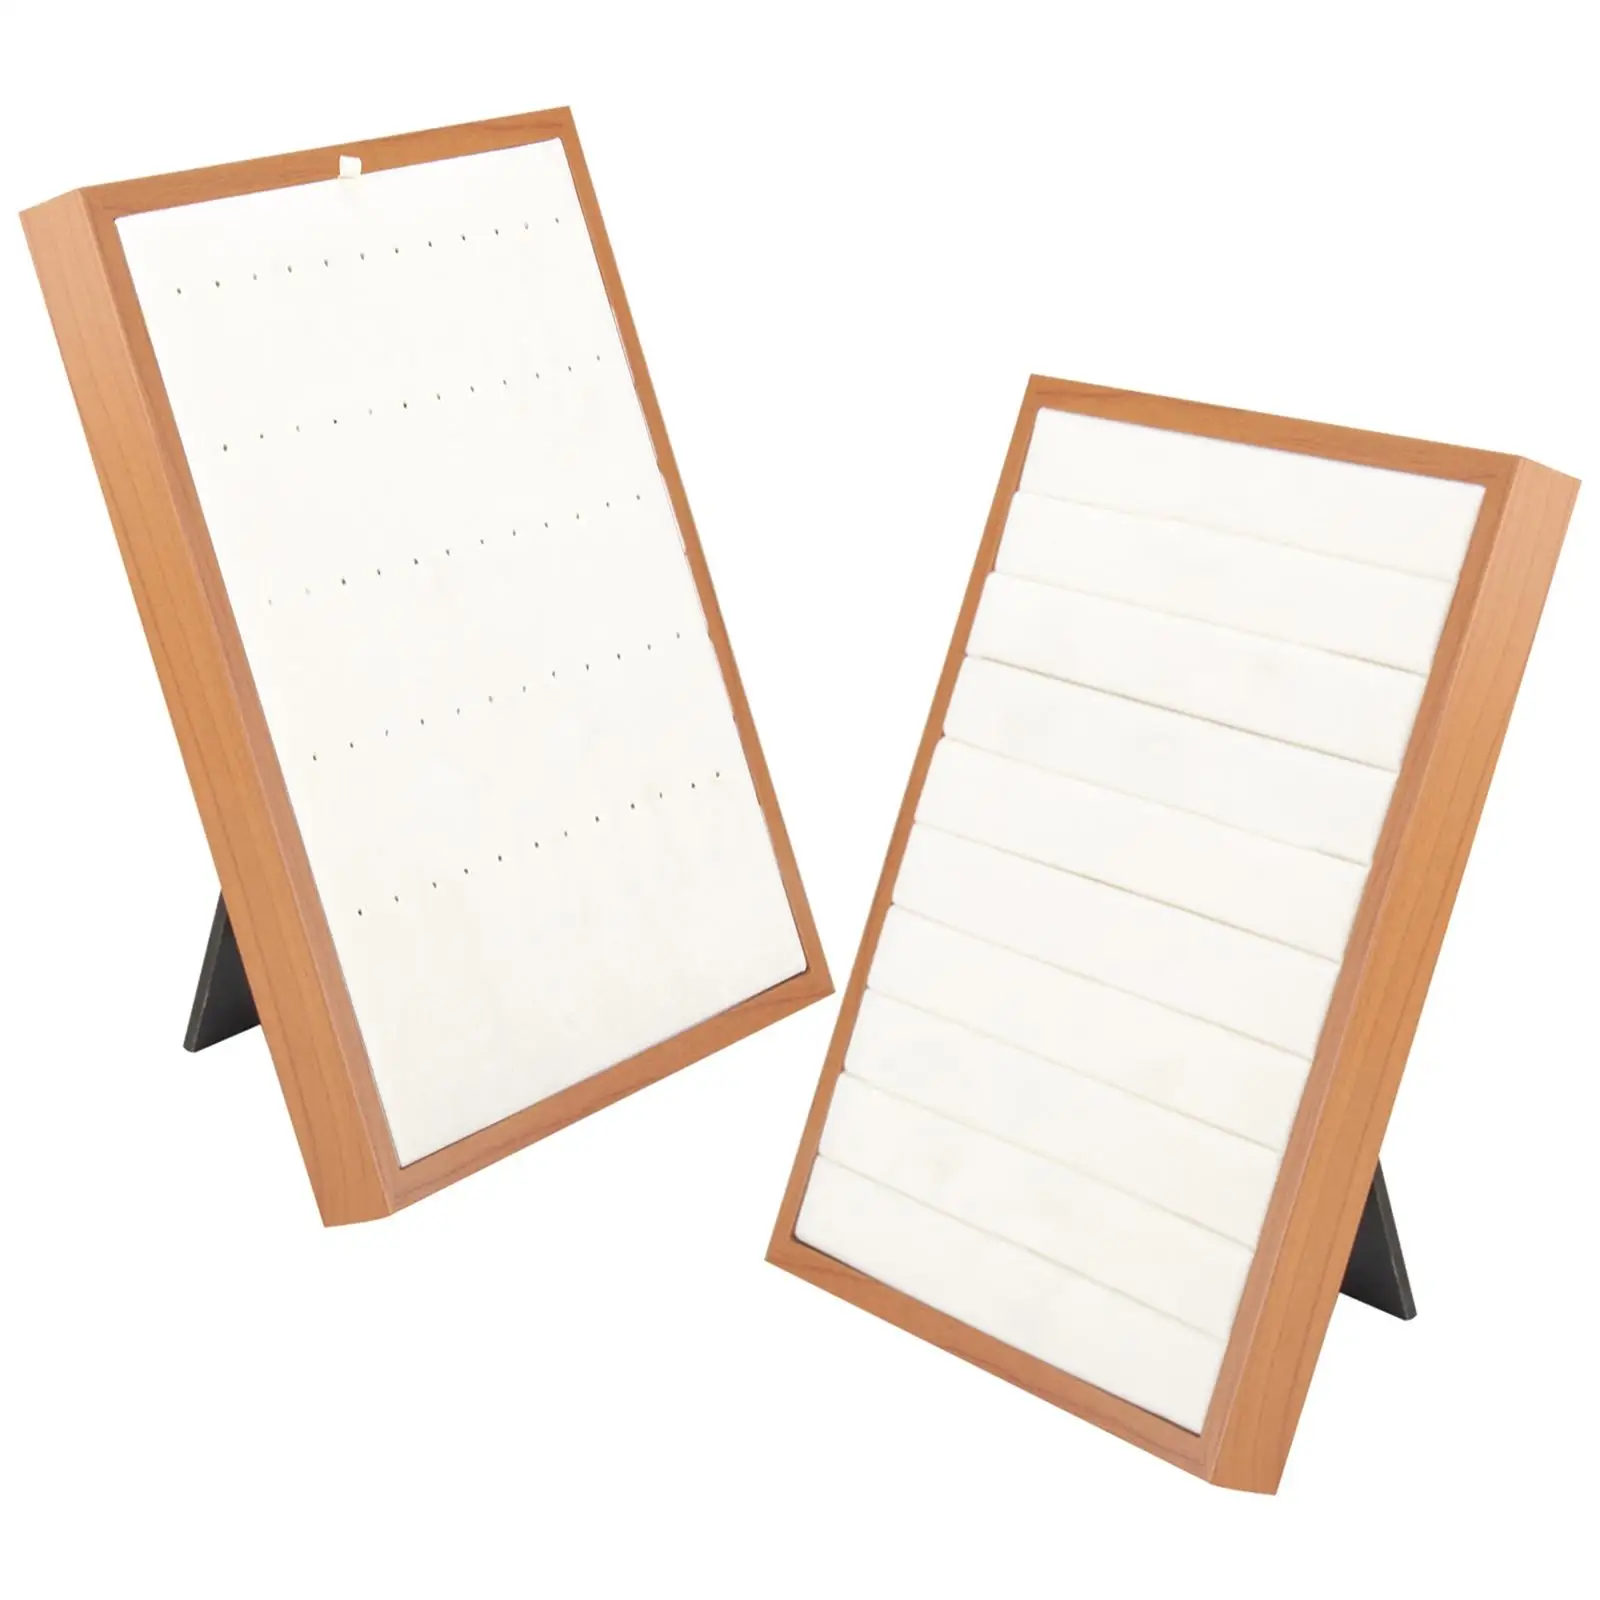 Wooden Jewelry Display Boards Showing  for Shop Showcase Home